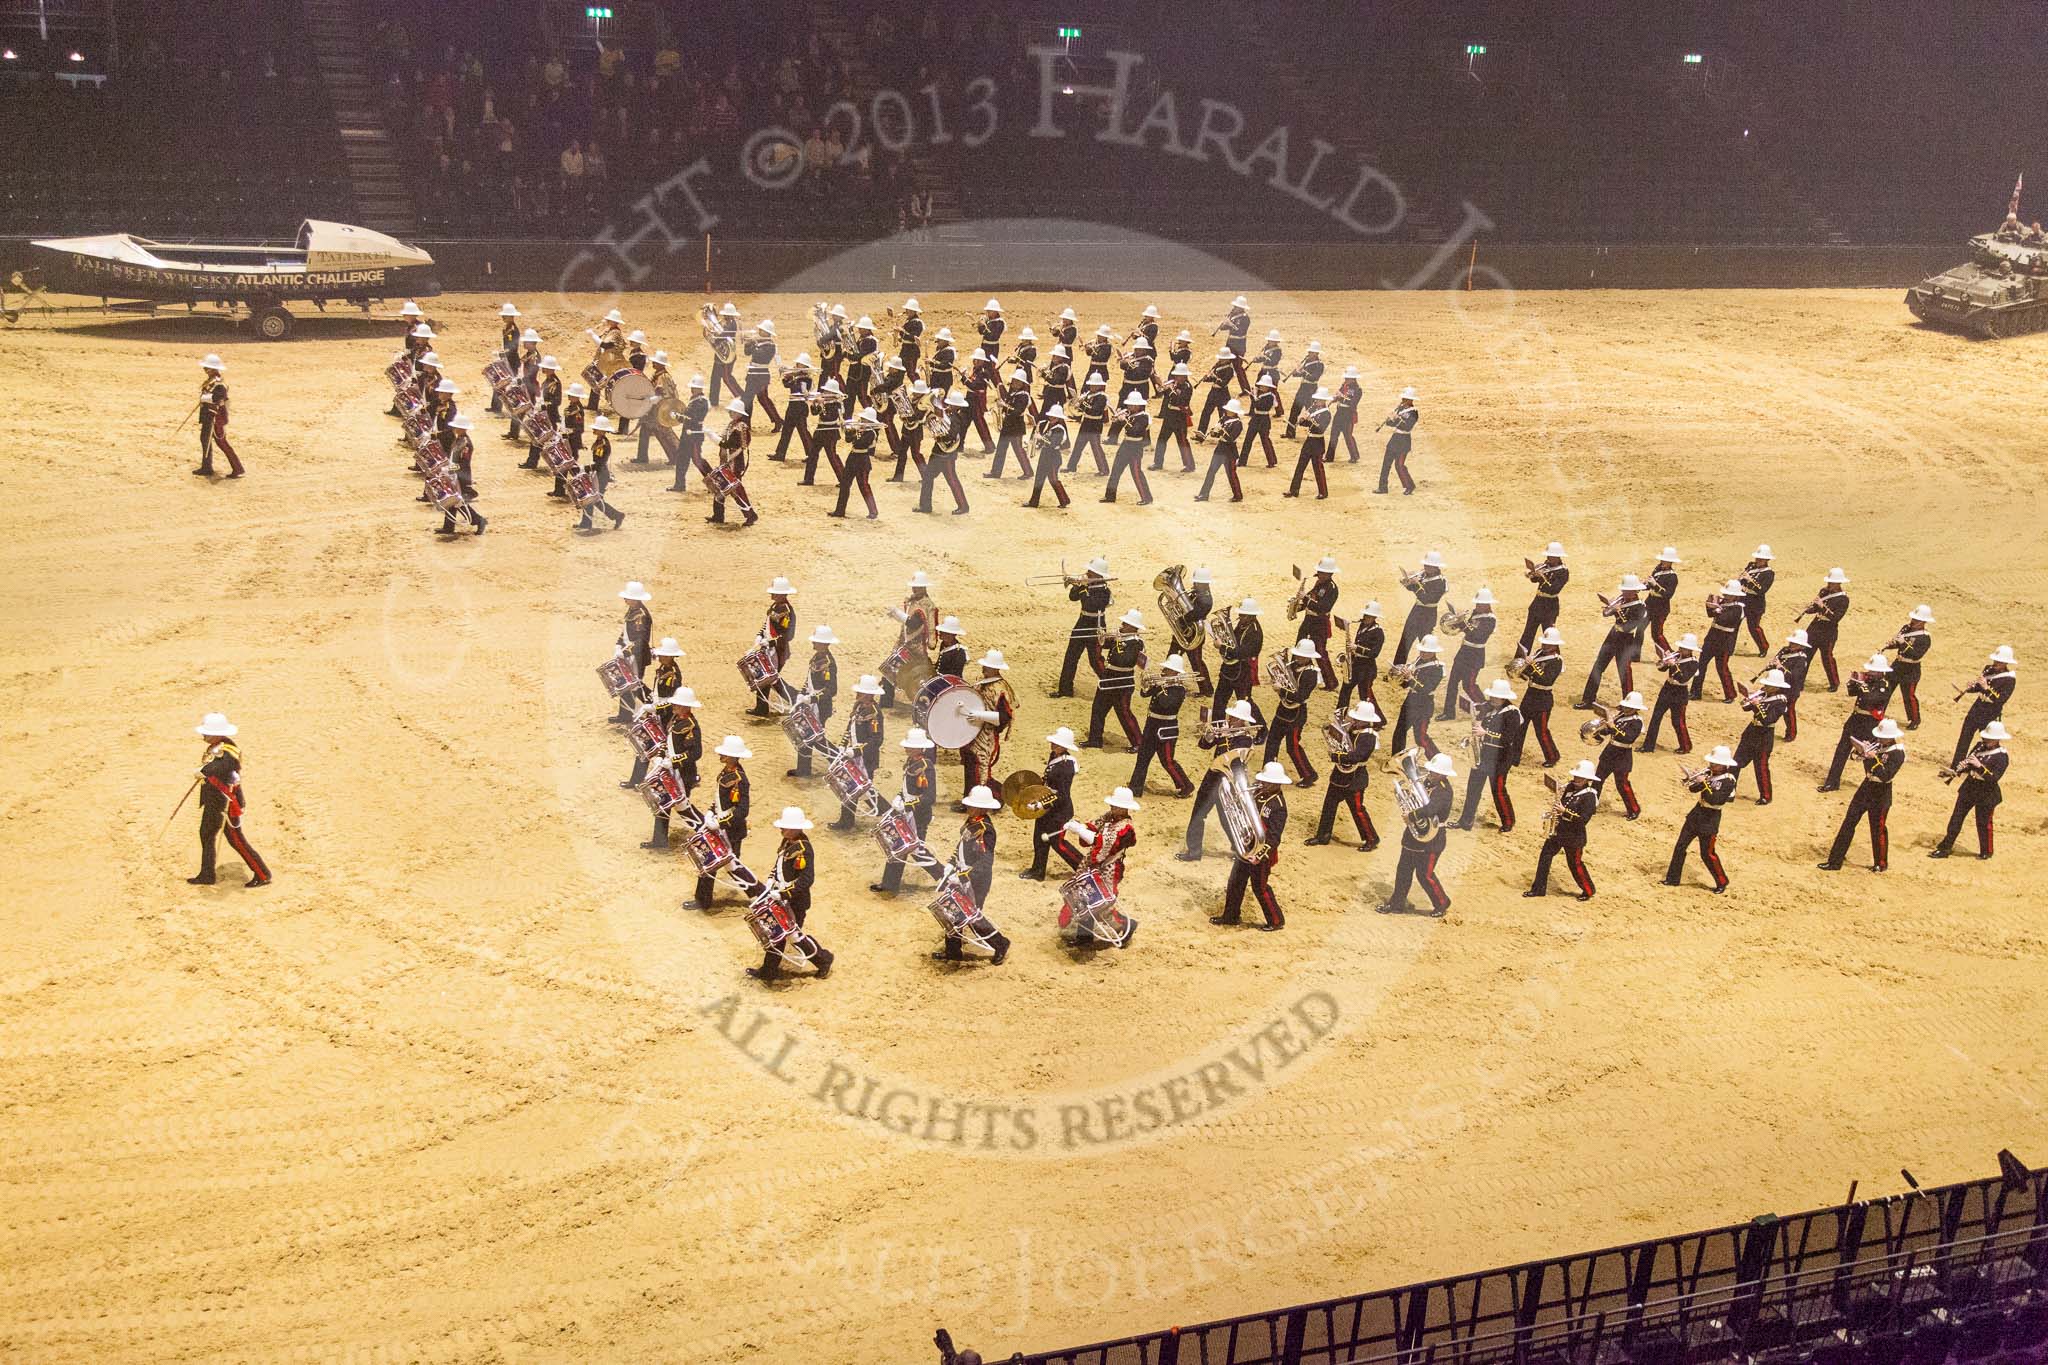 British Military Tournament 2013.
Earls Court,
London SW5,

United Kingdom,
on 06 December 2013 at 16:49, image #481